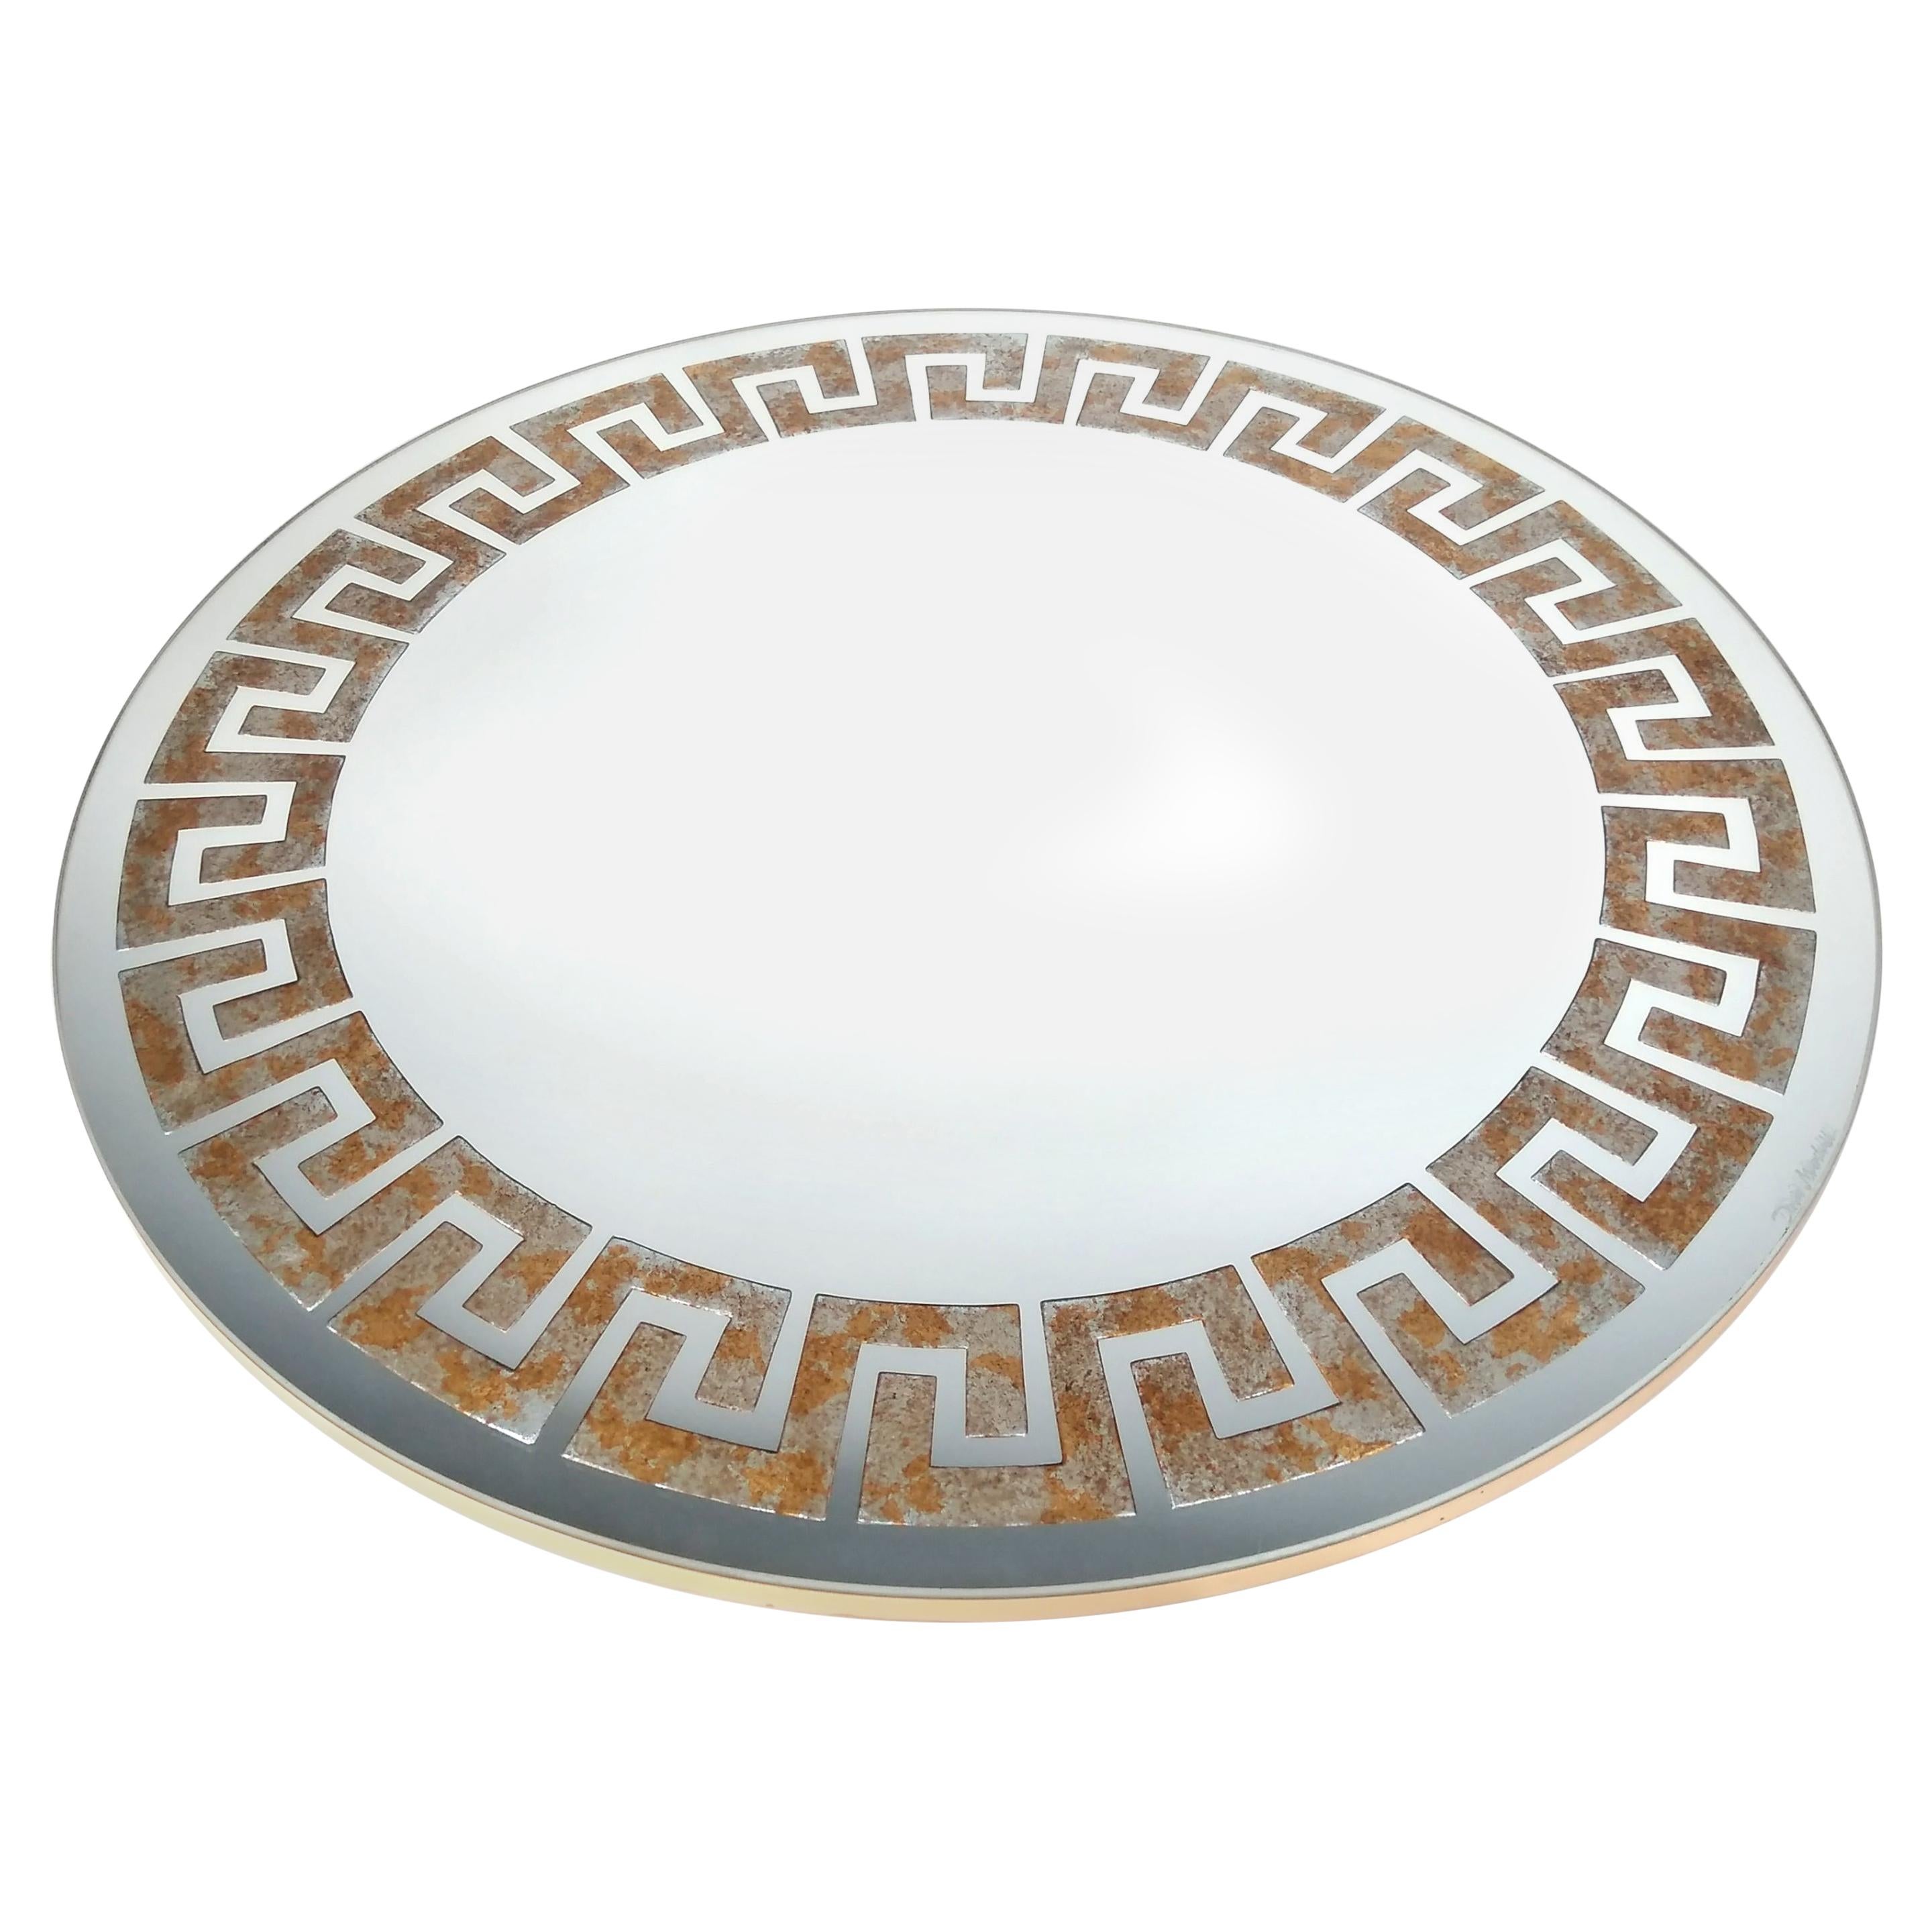 Designer David Marshall Mirror with Gilded Gold and Silver Greek Fret Design